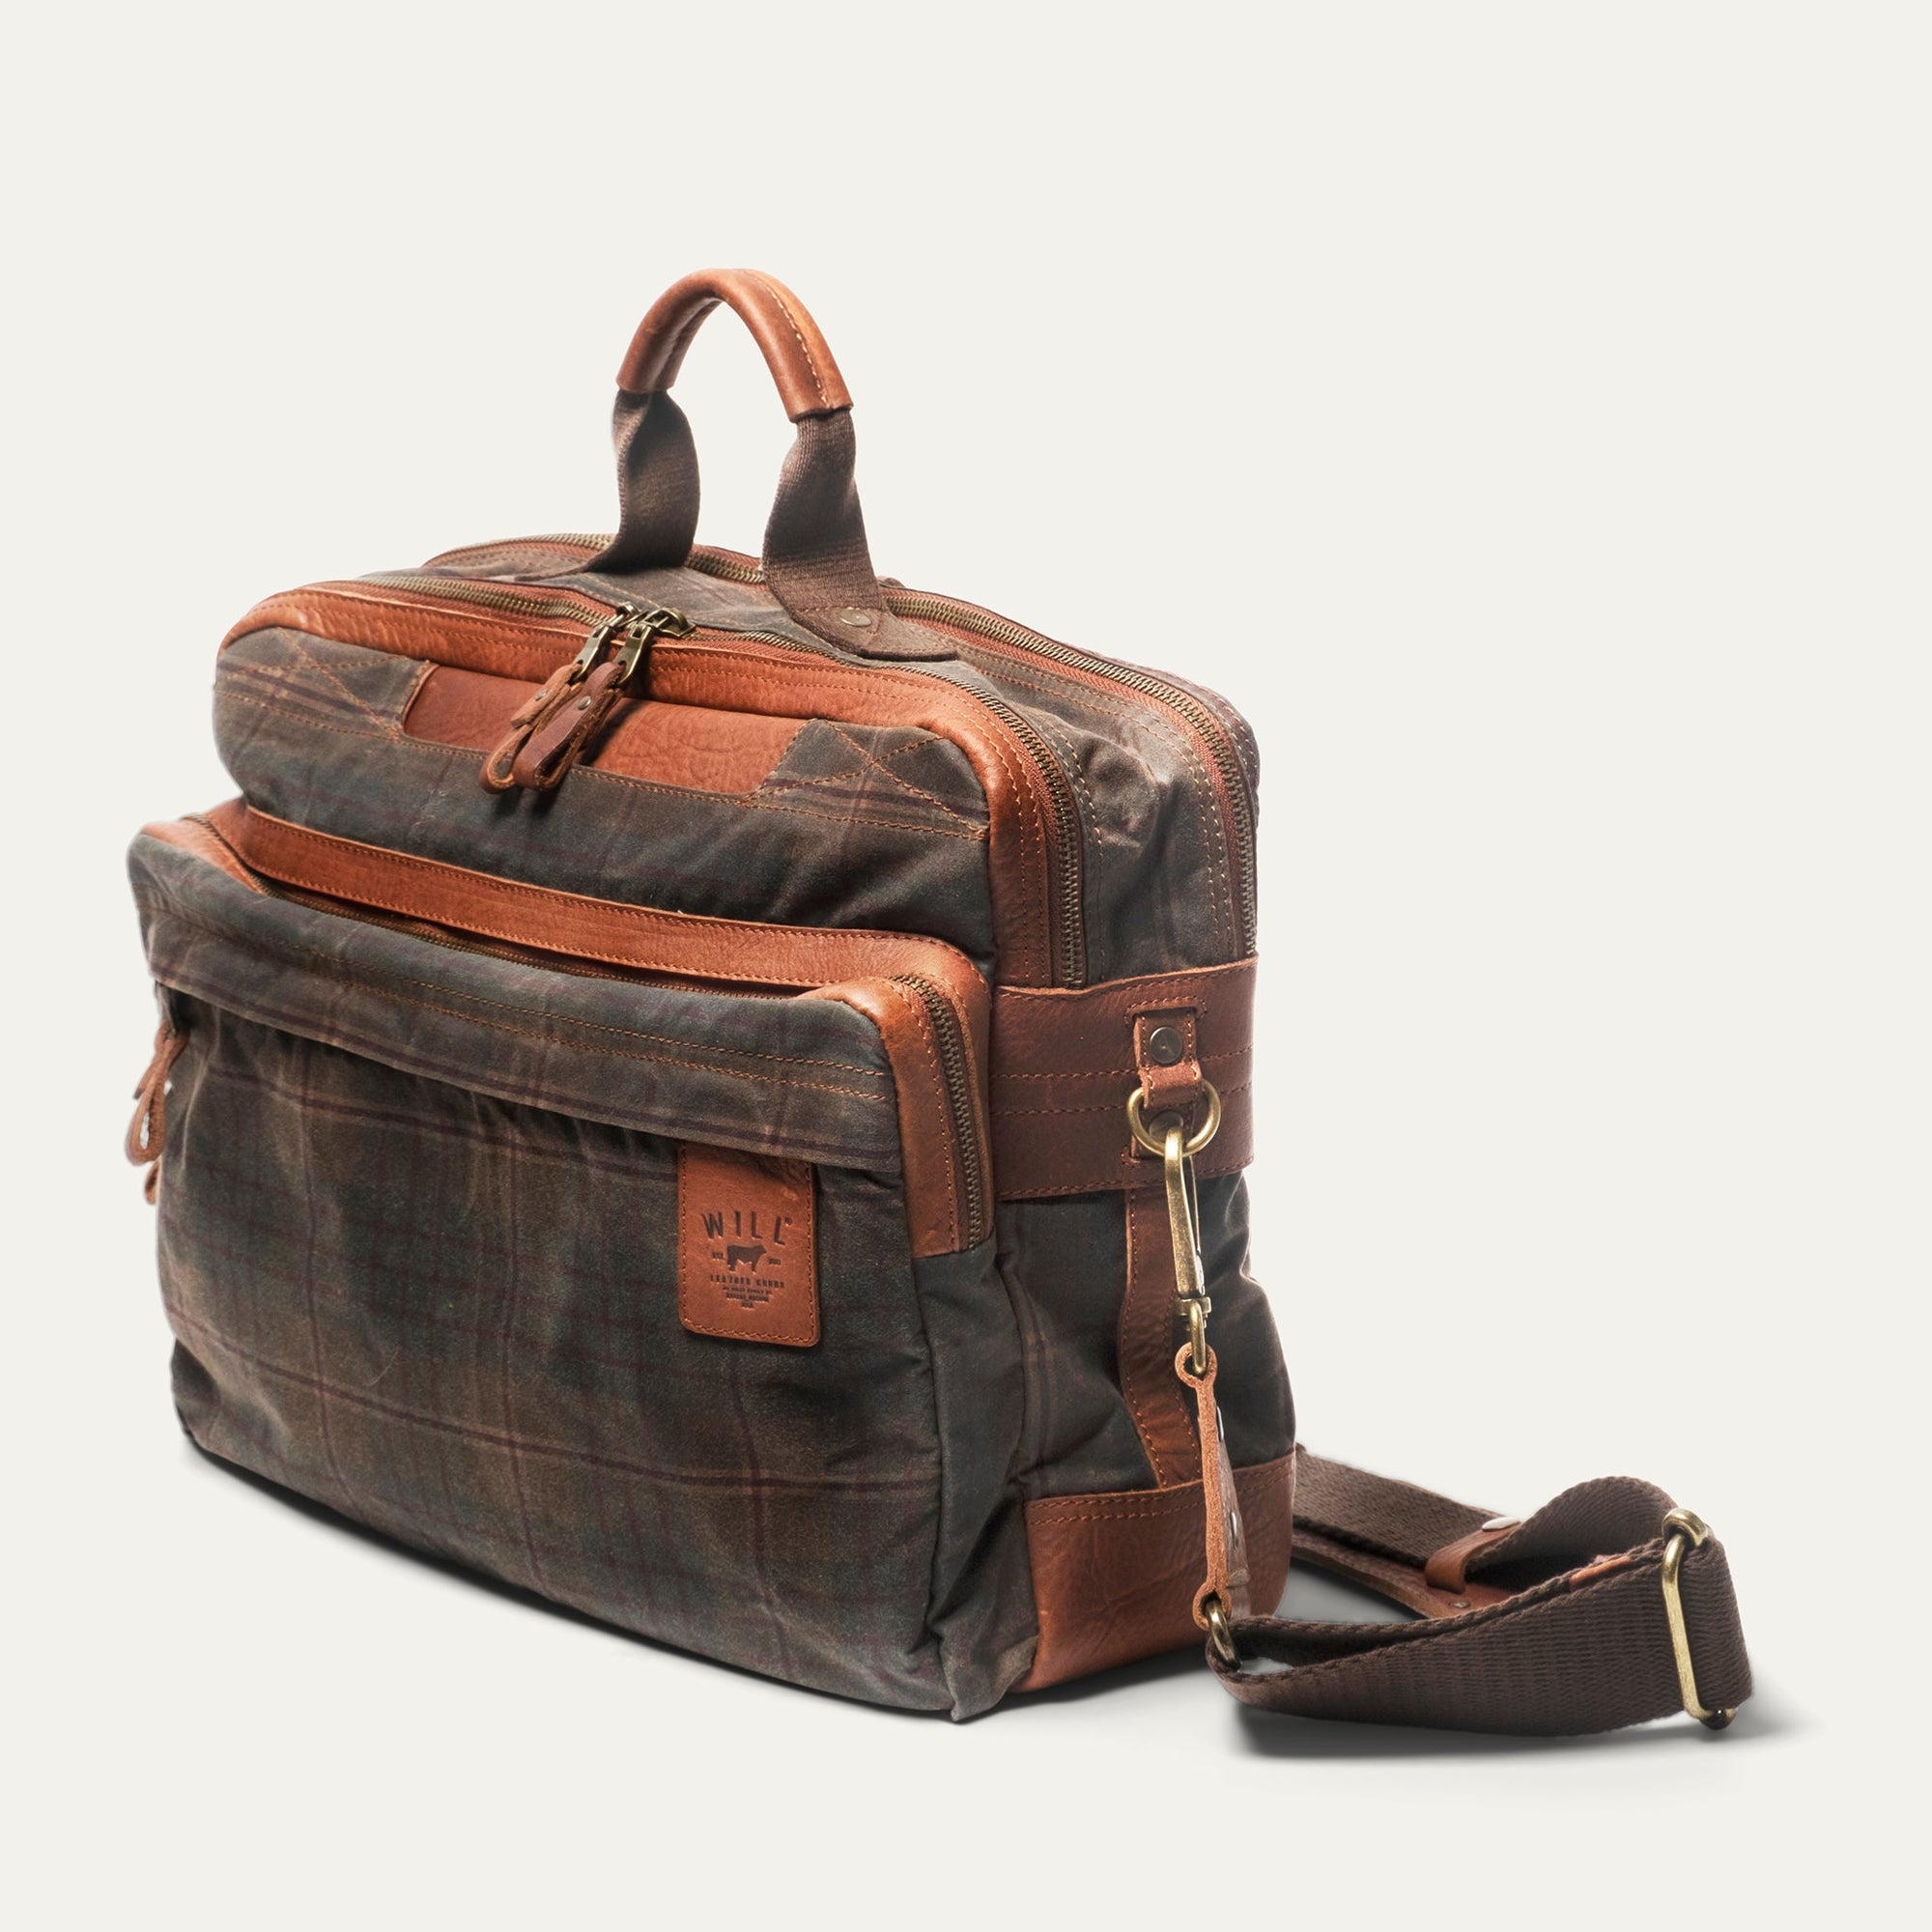 Waxed Canvas and Leather 'Adventure Collection' Commuter Bag in Autumn Plaid by Will Leather Goods